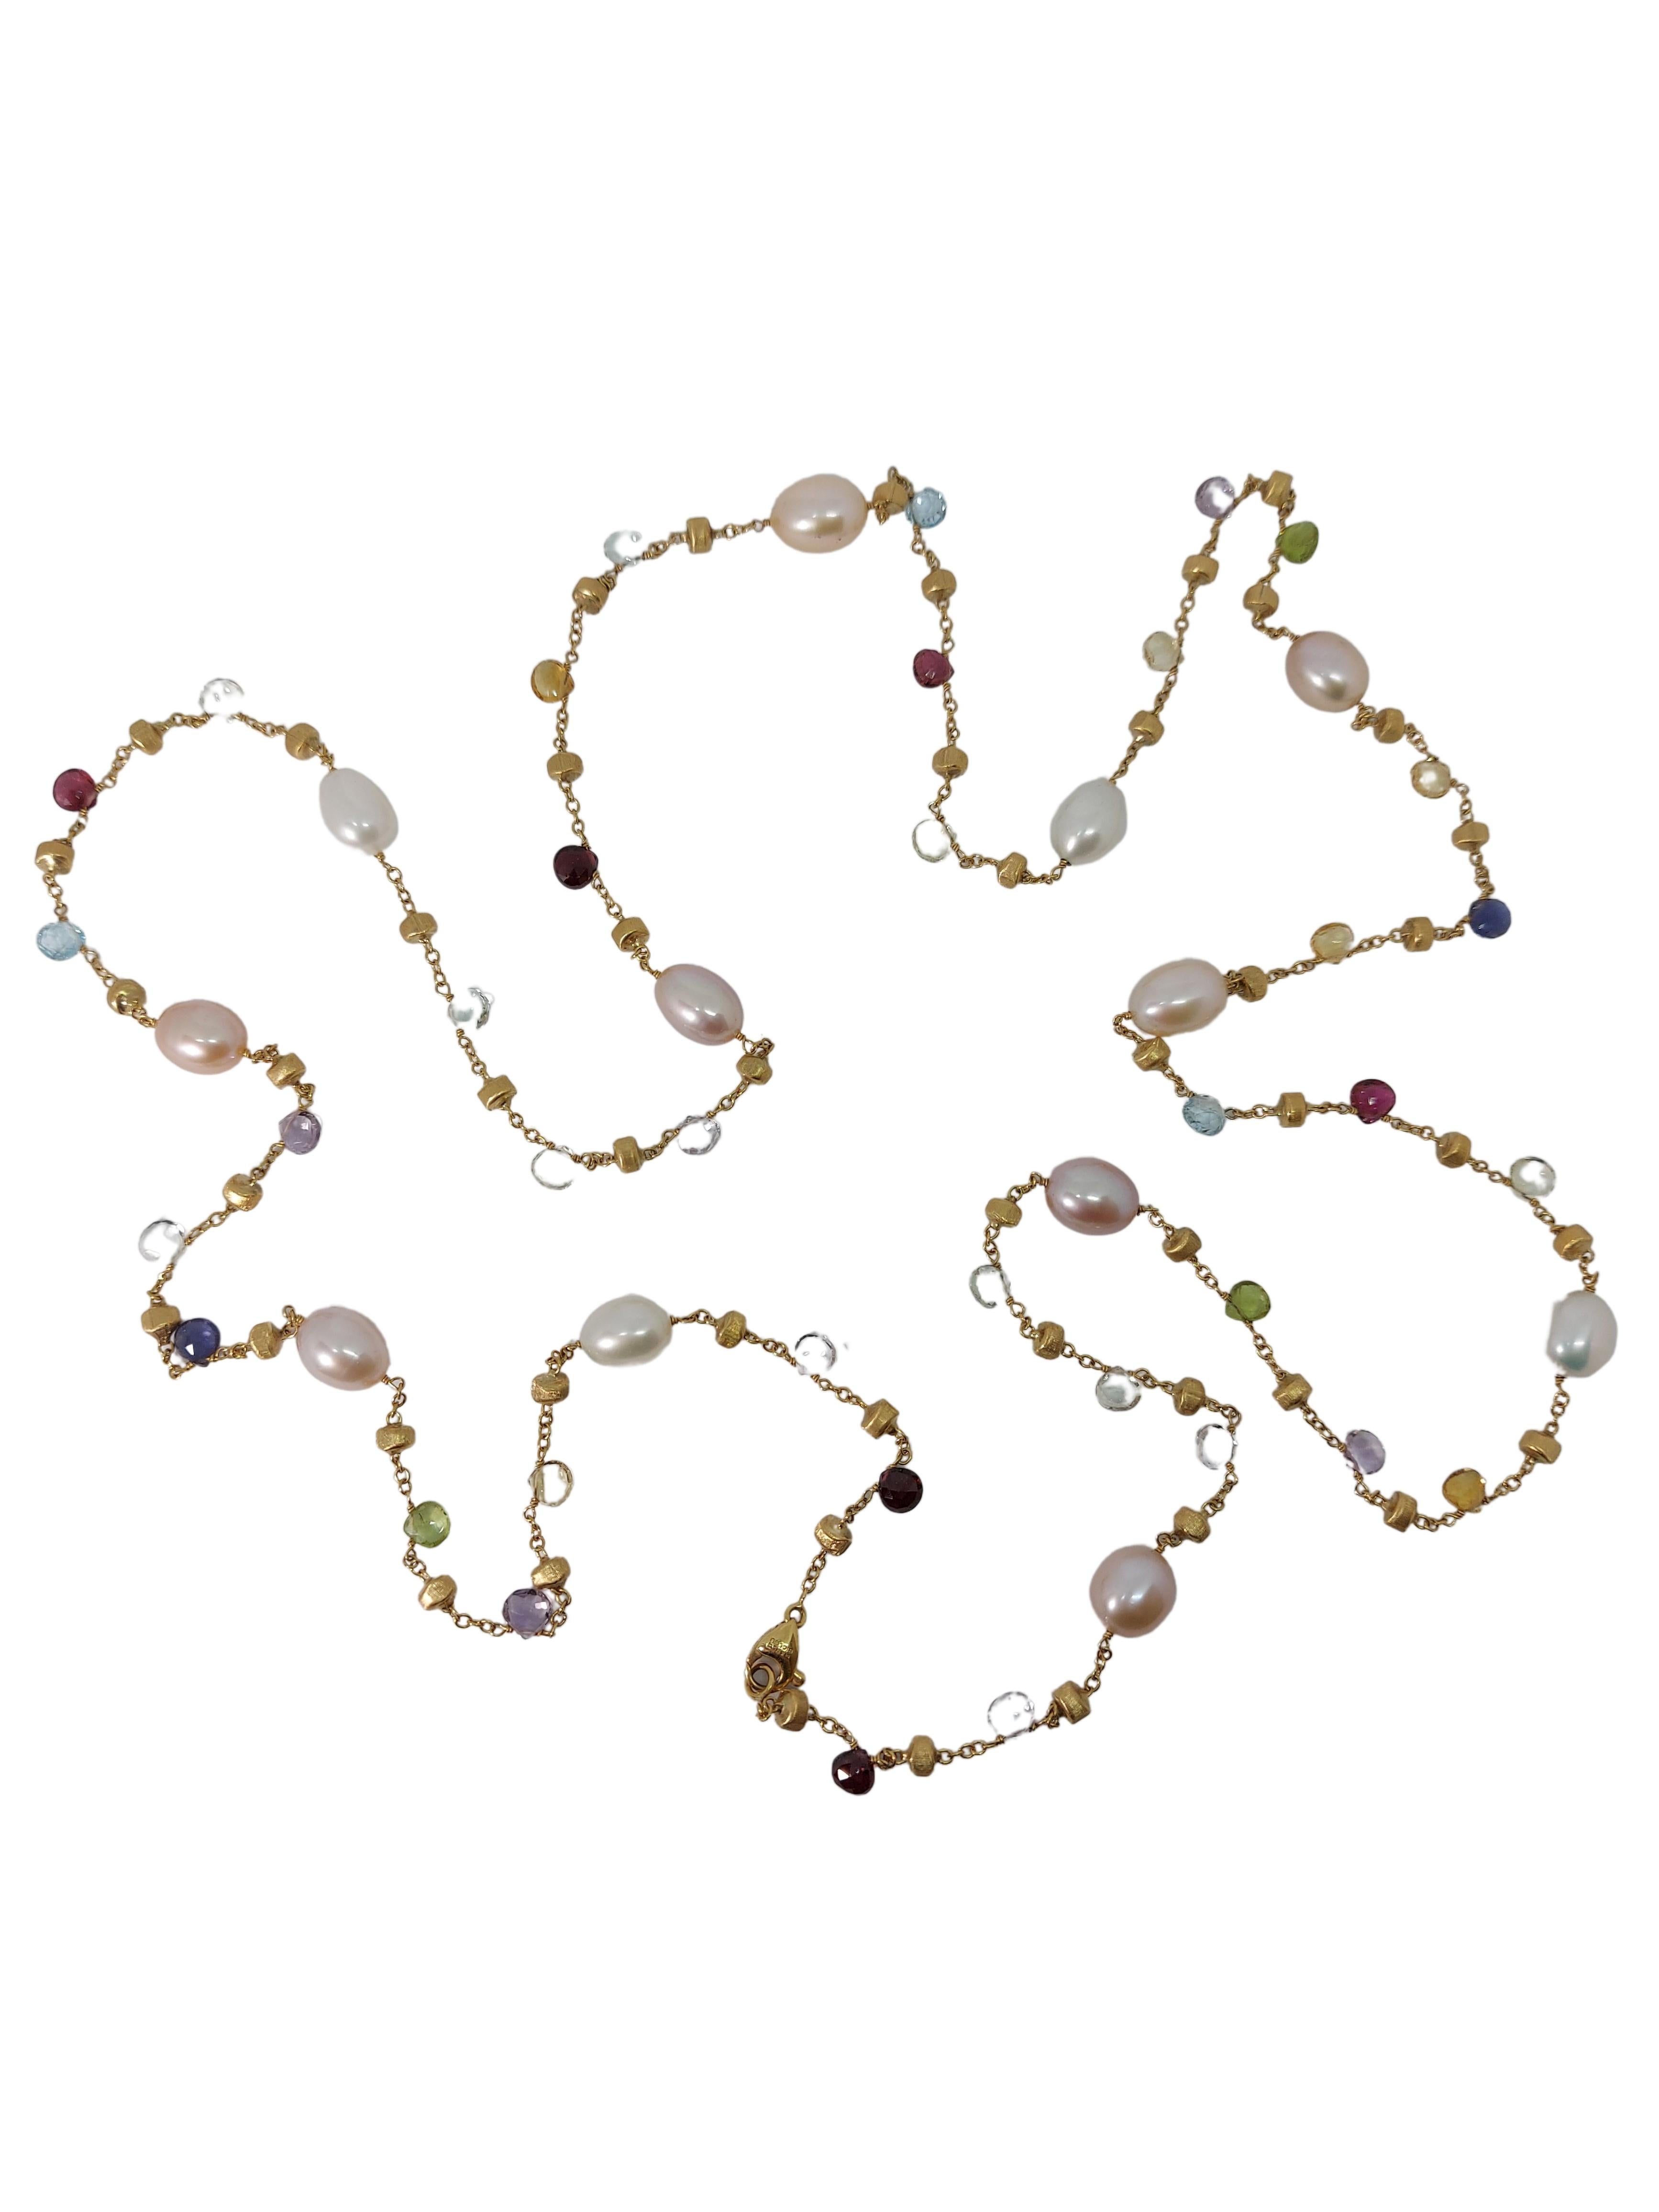 Delightfull 18kt Yellow Gold Long Necklace from Marco Bicego Paradise Collection with pearls and Semi Precious stones in Briolet Cut

Semi Precious stones: Tourmaline, Amethyst, Aquamarine, Citrine & Rubellite
3 yellow
3 green
13 white
3 light